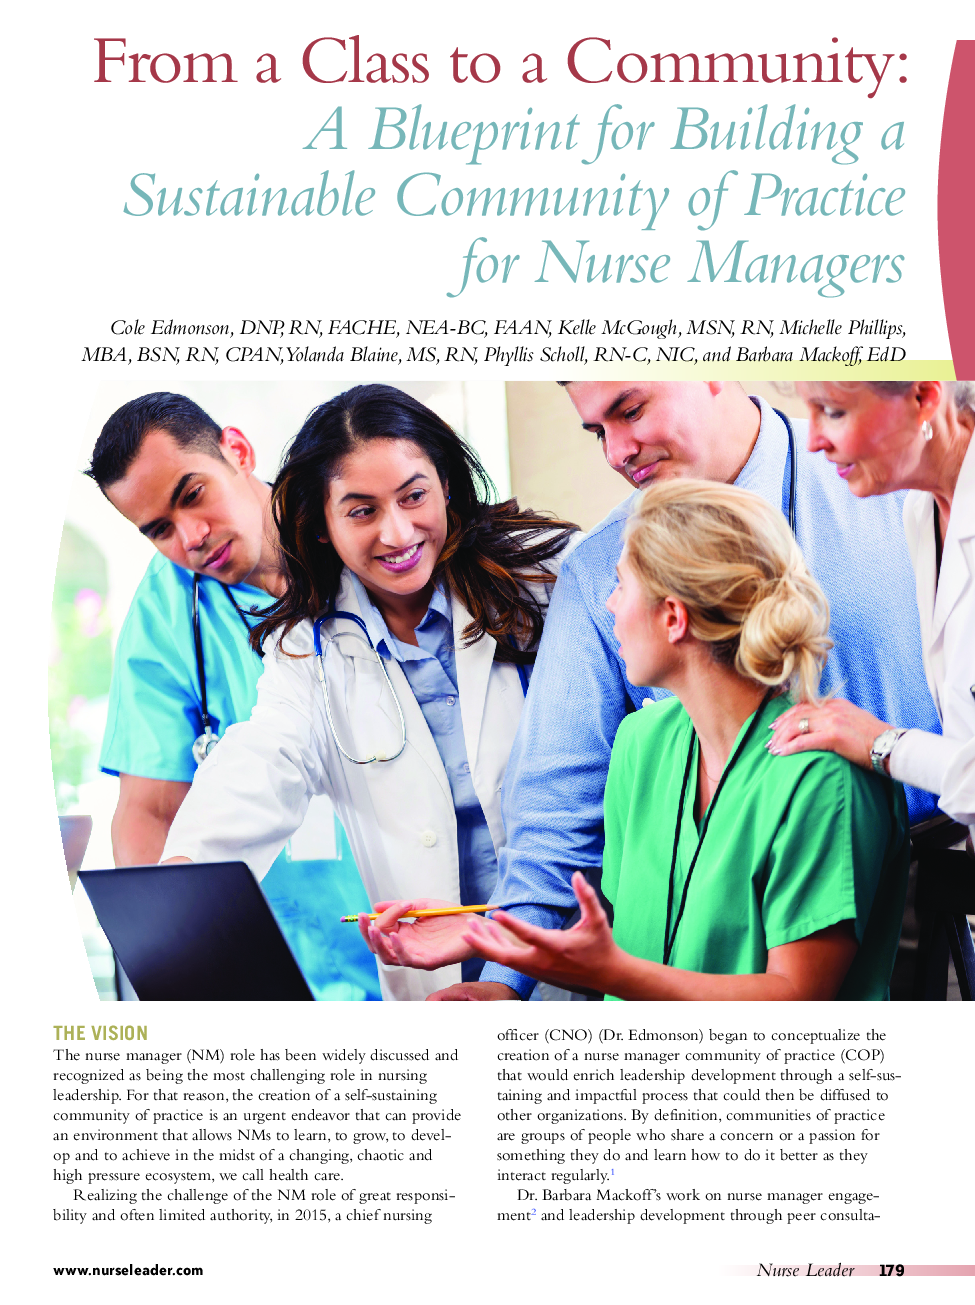 From a Class to a Community: A Blueprint for Building a Sustainable Community of Practice for Nurse Managers